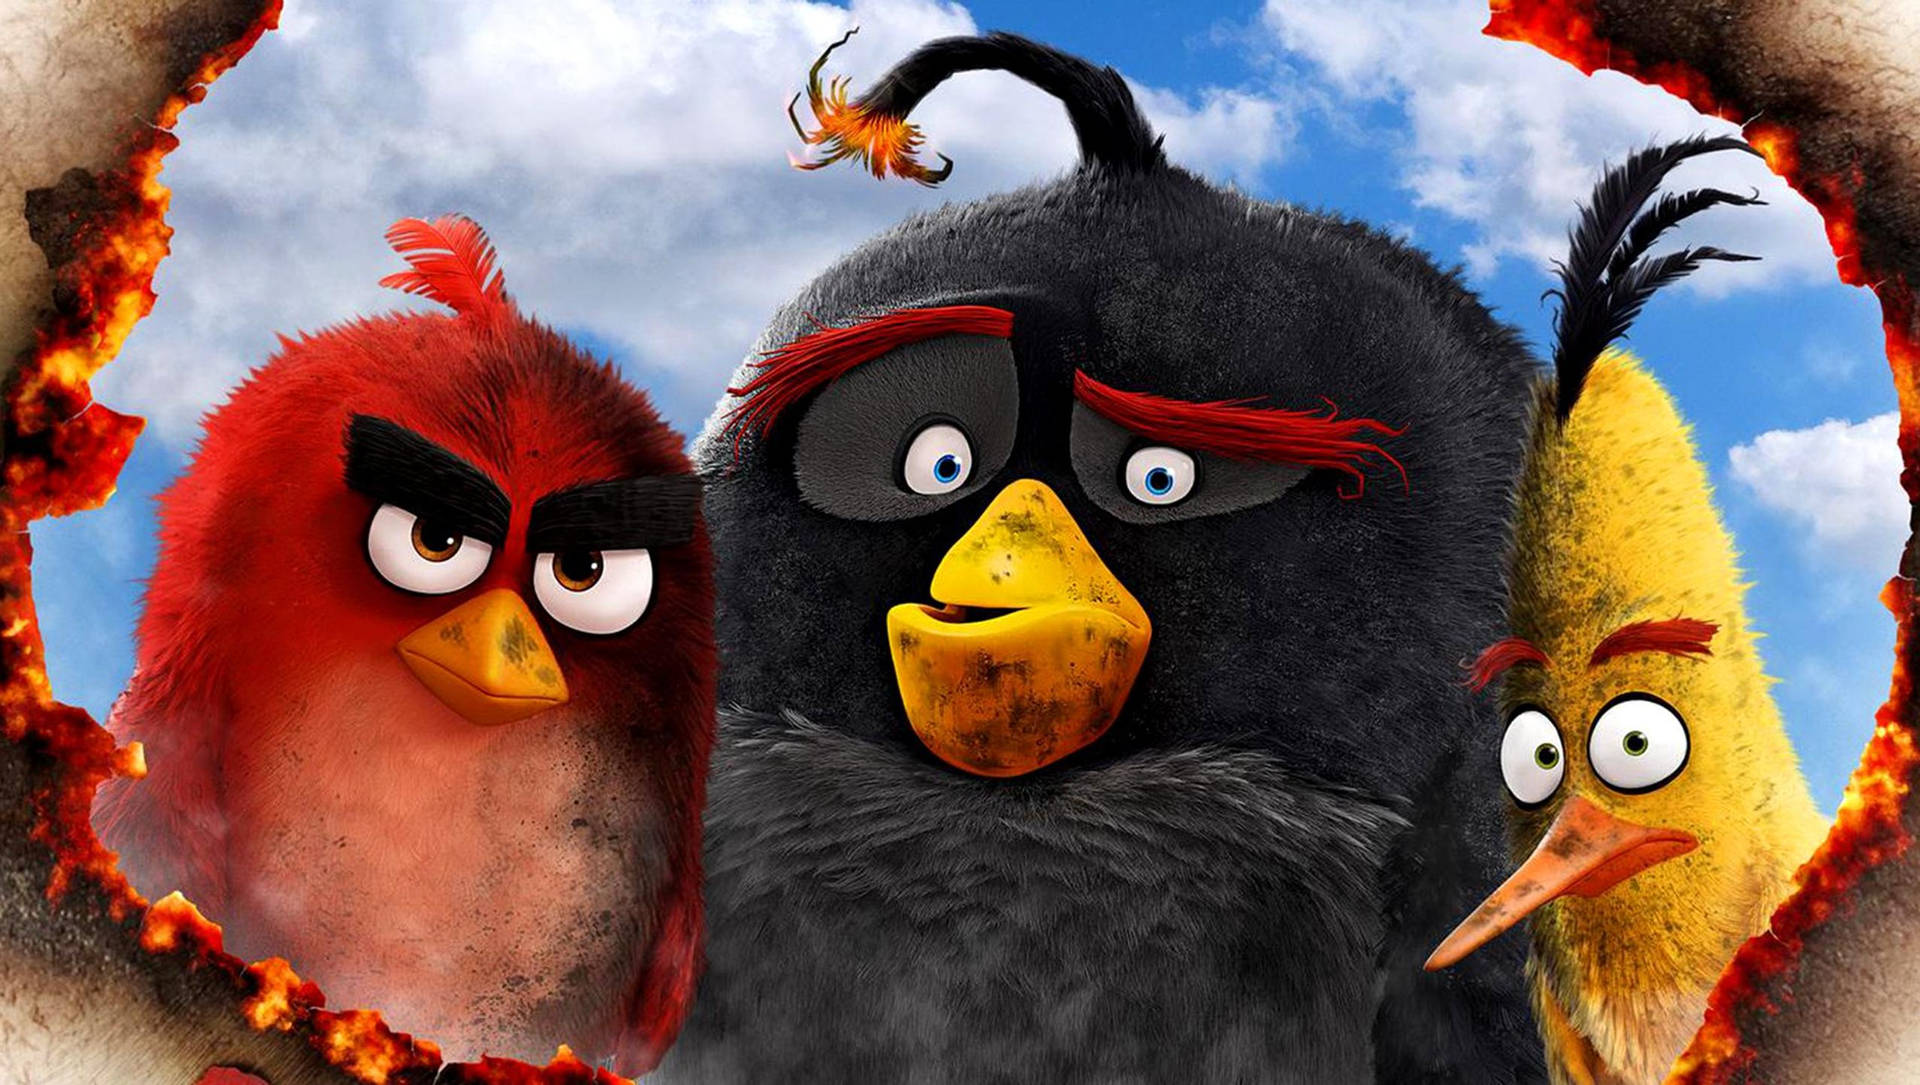 Download The Angry Birds Movie 2 Main Gang Wallpaper 